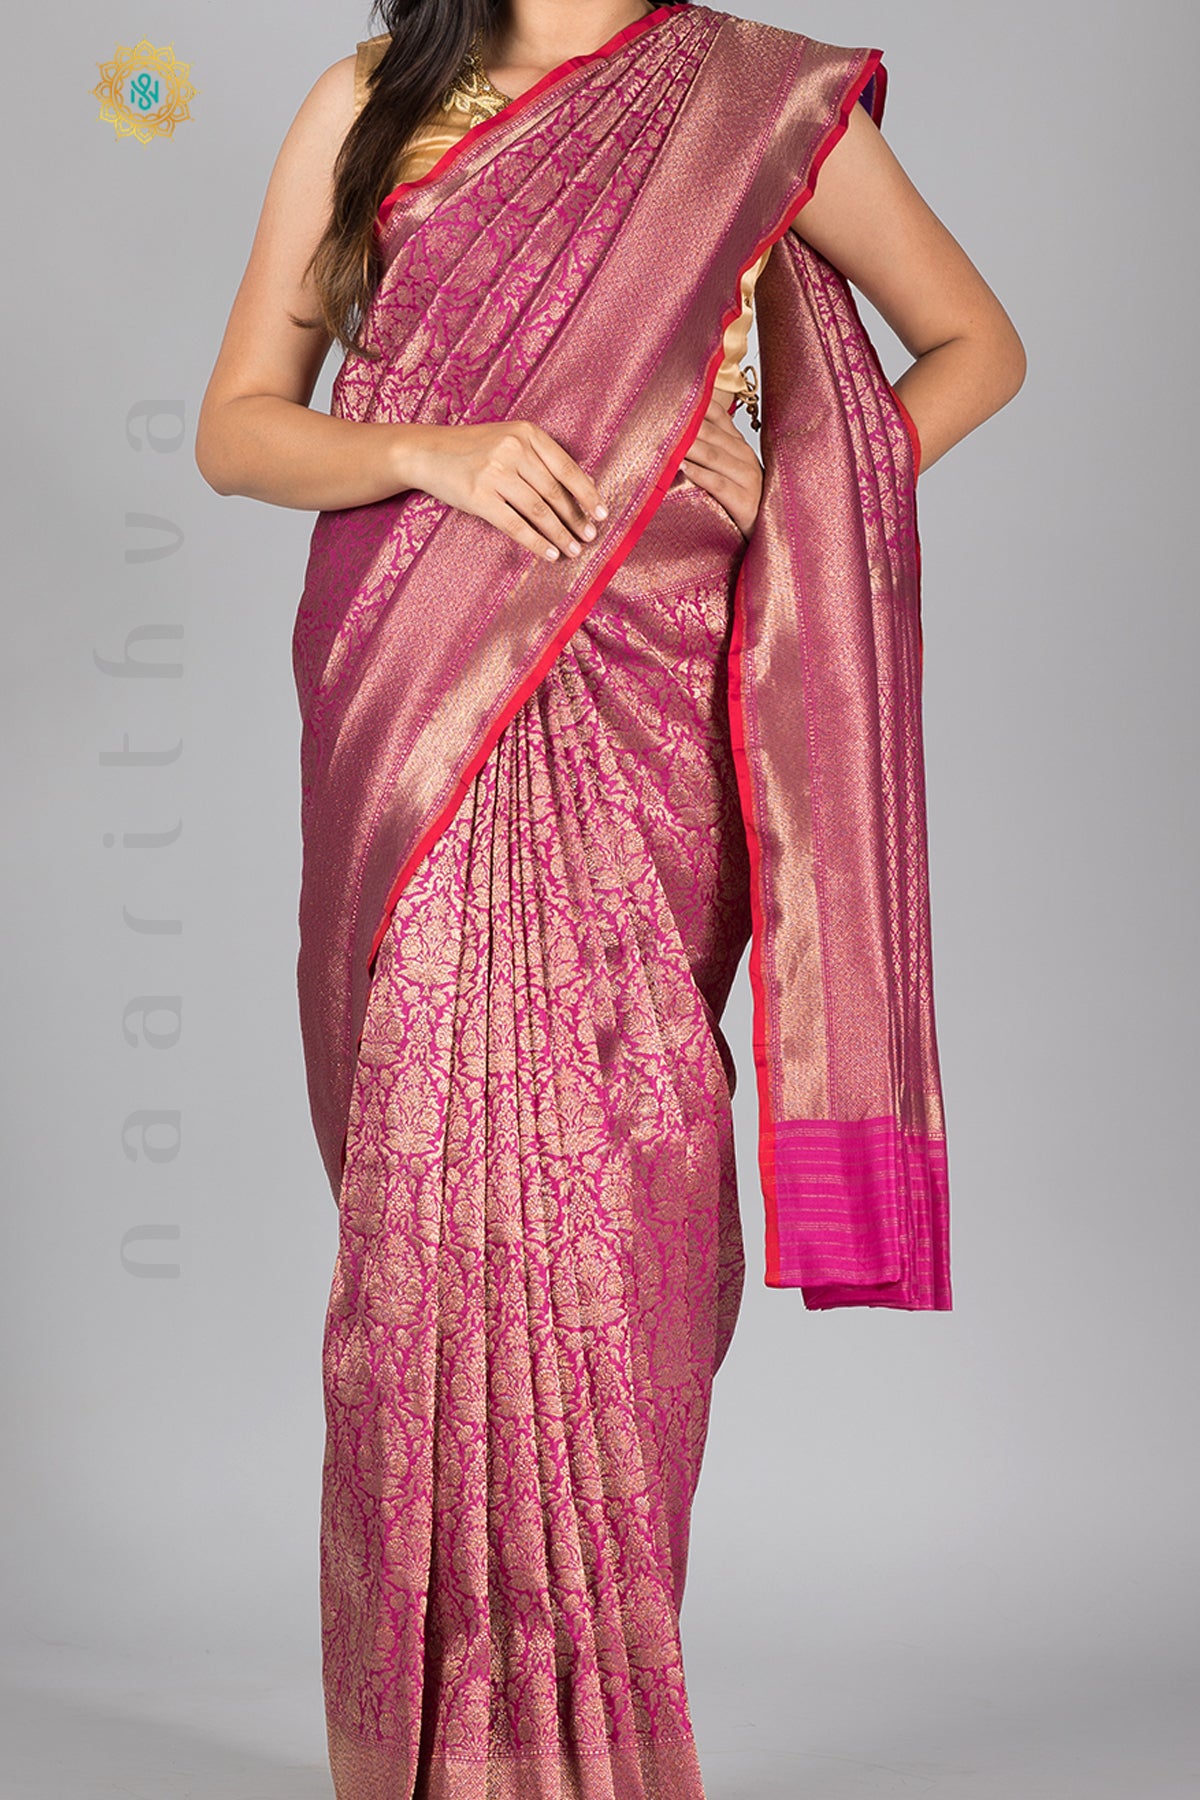 PINK WITH RED - PURE HANDLOOM KATAN SILK WITH ANTIQUE ZARI WEAVES & CONTRAST BLOUSE